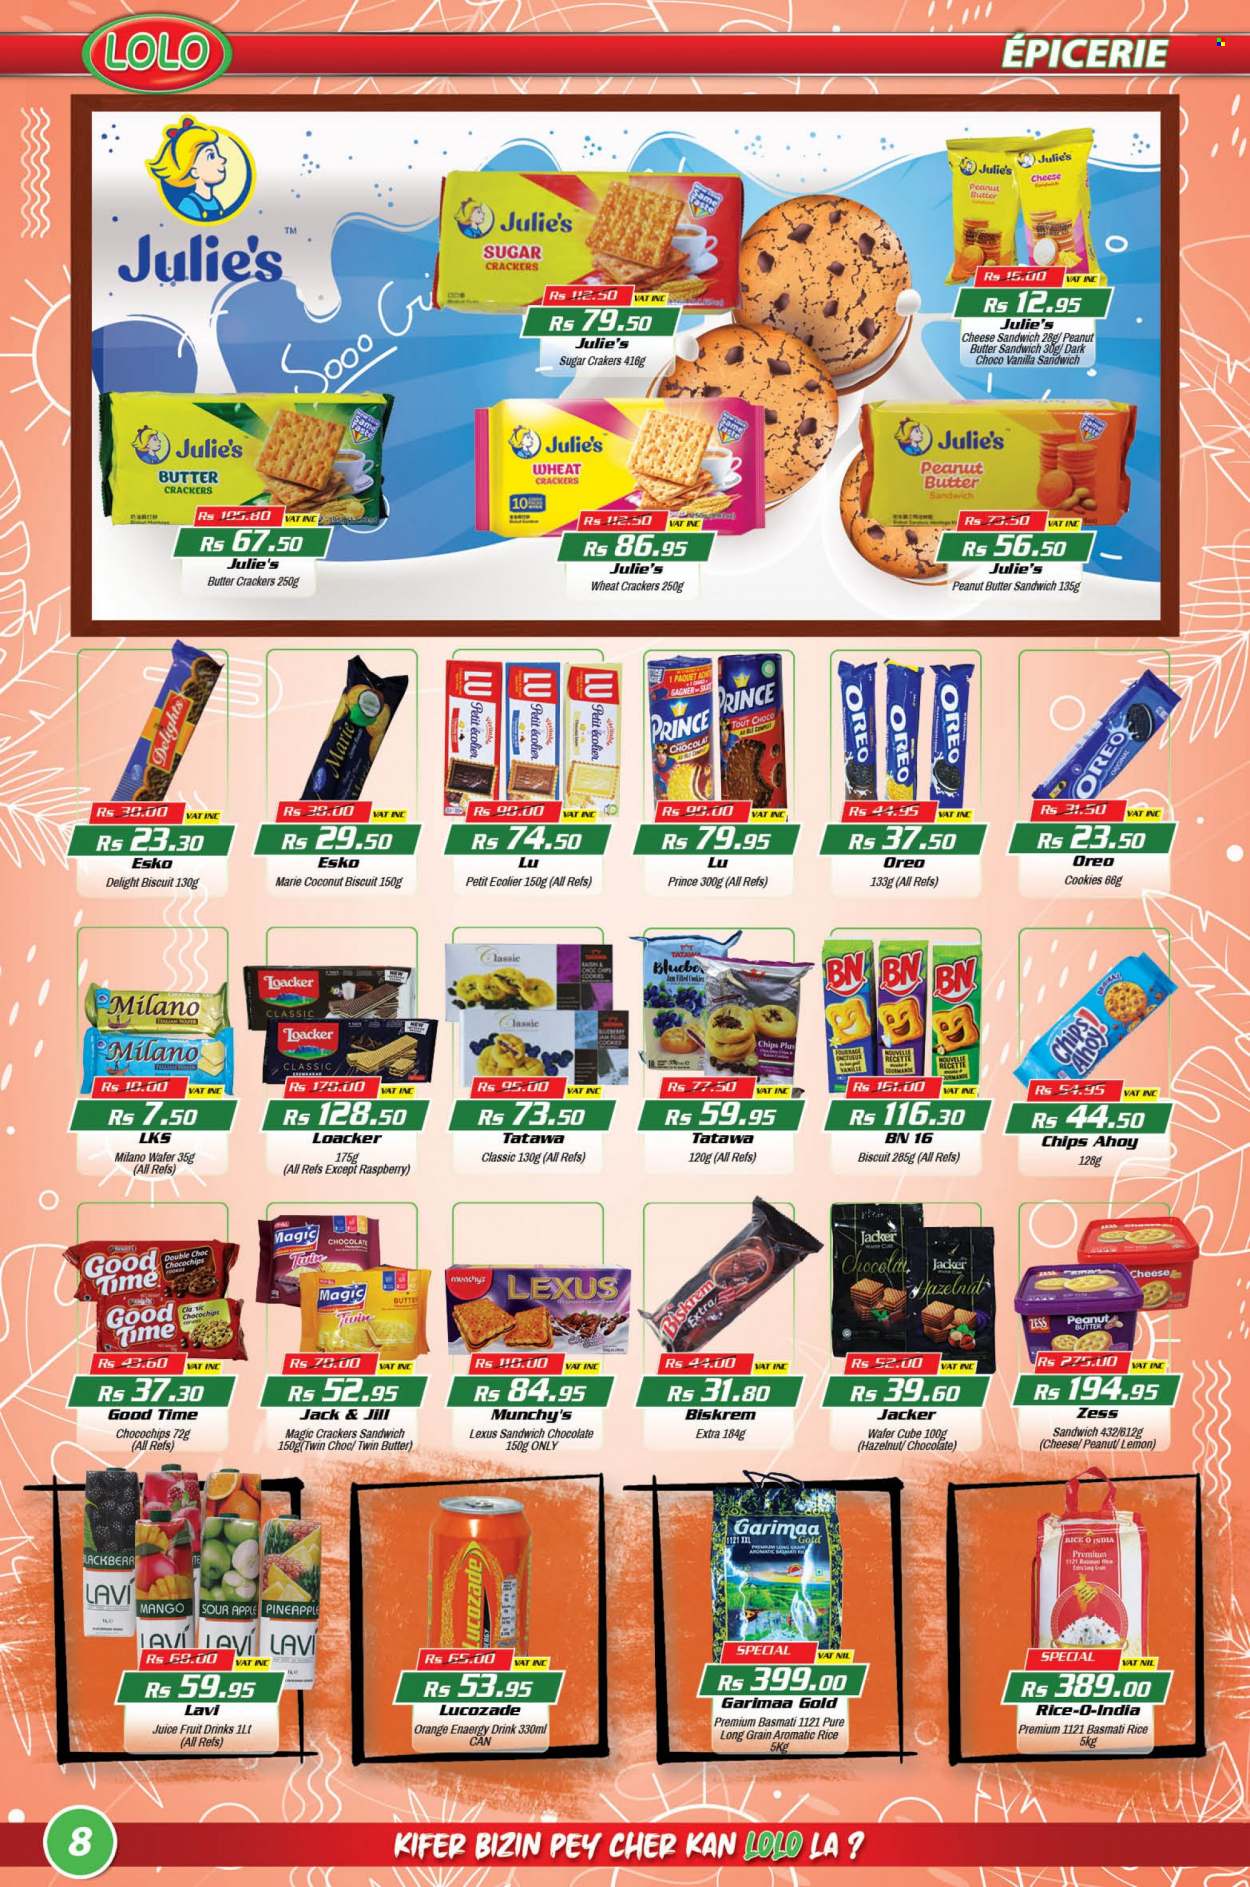 thumbnail - LOLO Hyper Catalogue - 26.08.2022 - 15.09.2022 - Sales products - mango, pineapple, coconut, oranges, cookies, wafers, chocolate, crackers, biscuit, Julie's, chips, sugar, basmati rice, rice, peanut butter, juice, Lucozade, Burberry, Oreo. Page 8.